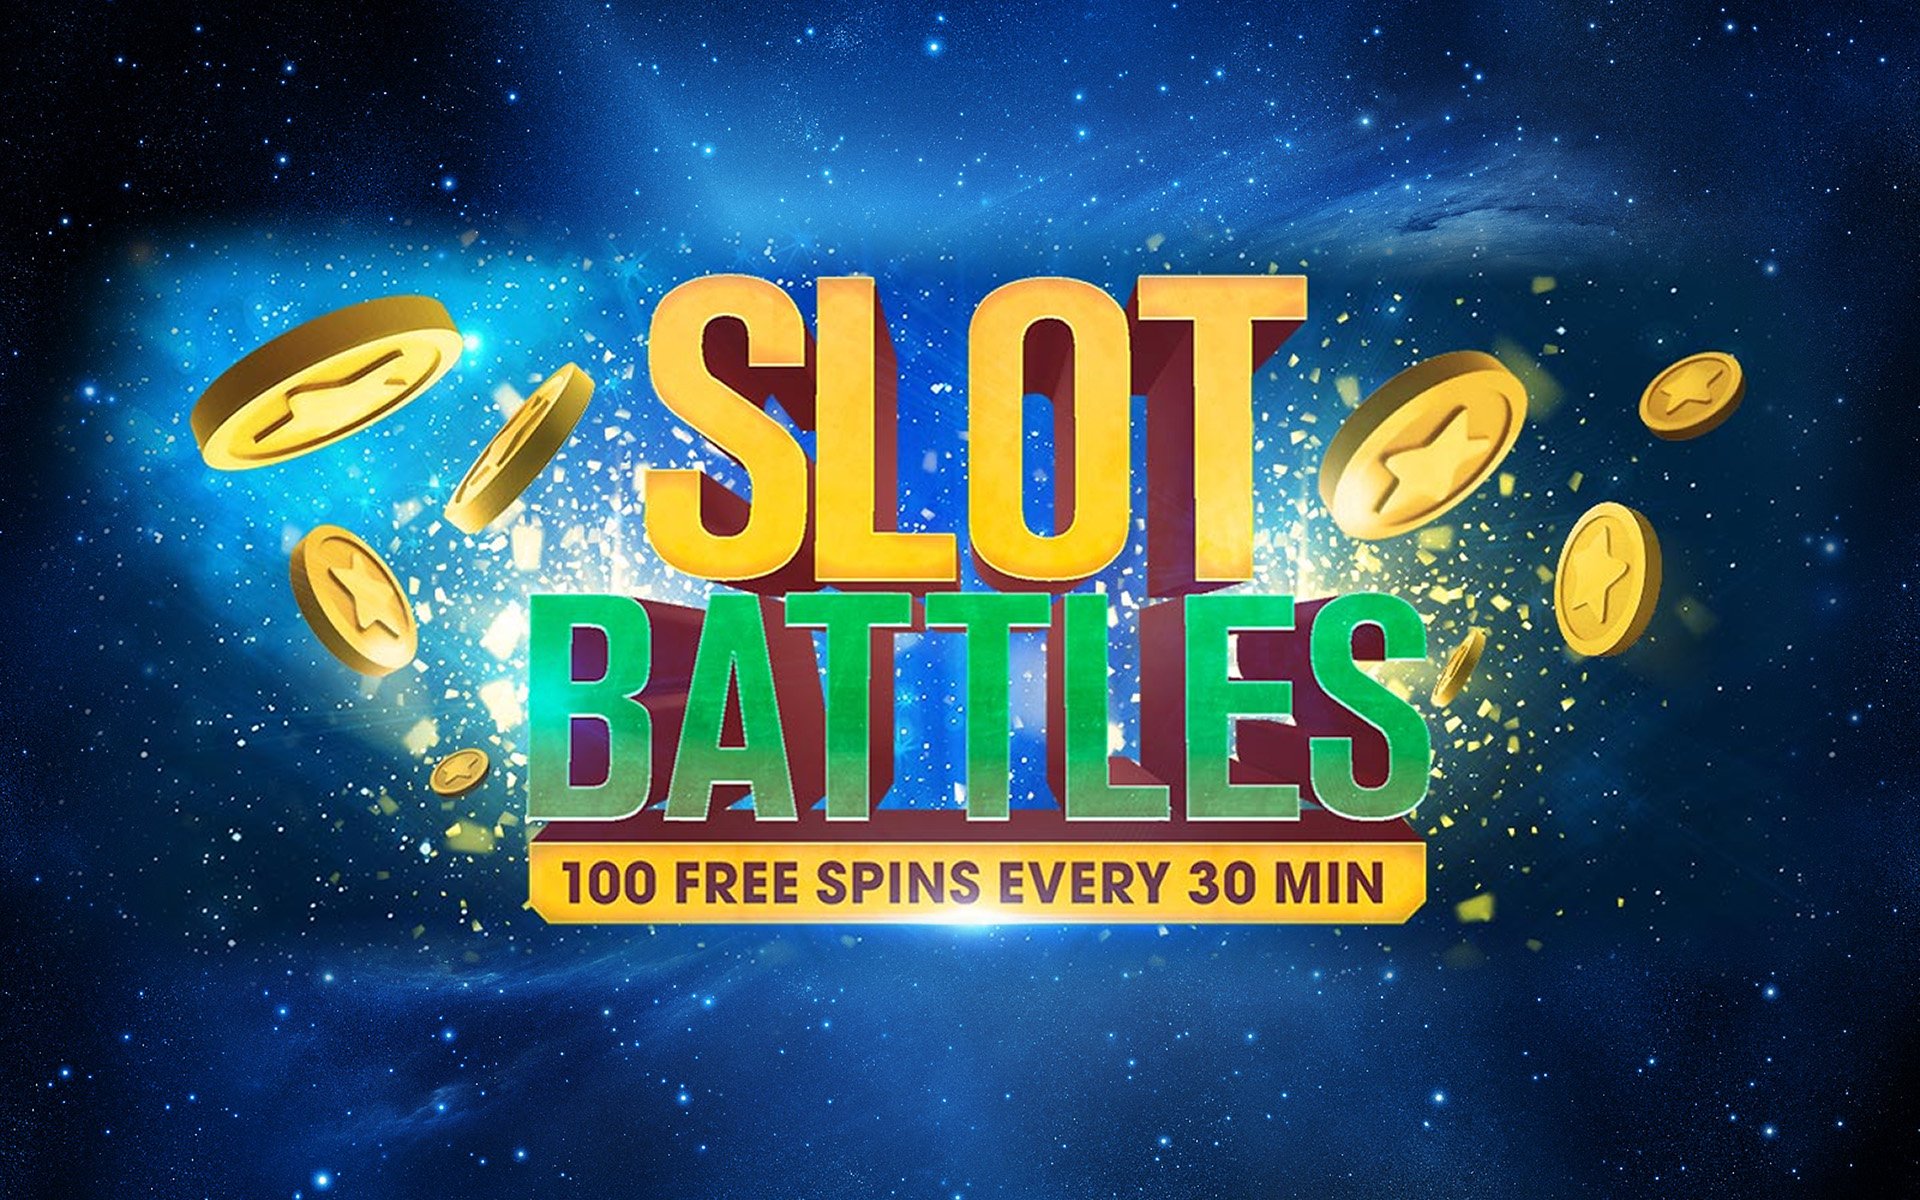 144,000 Free Spins Up for Grabs Monthly in BitStarz’s New Slot Battles!